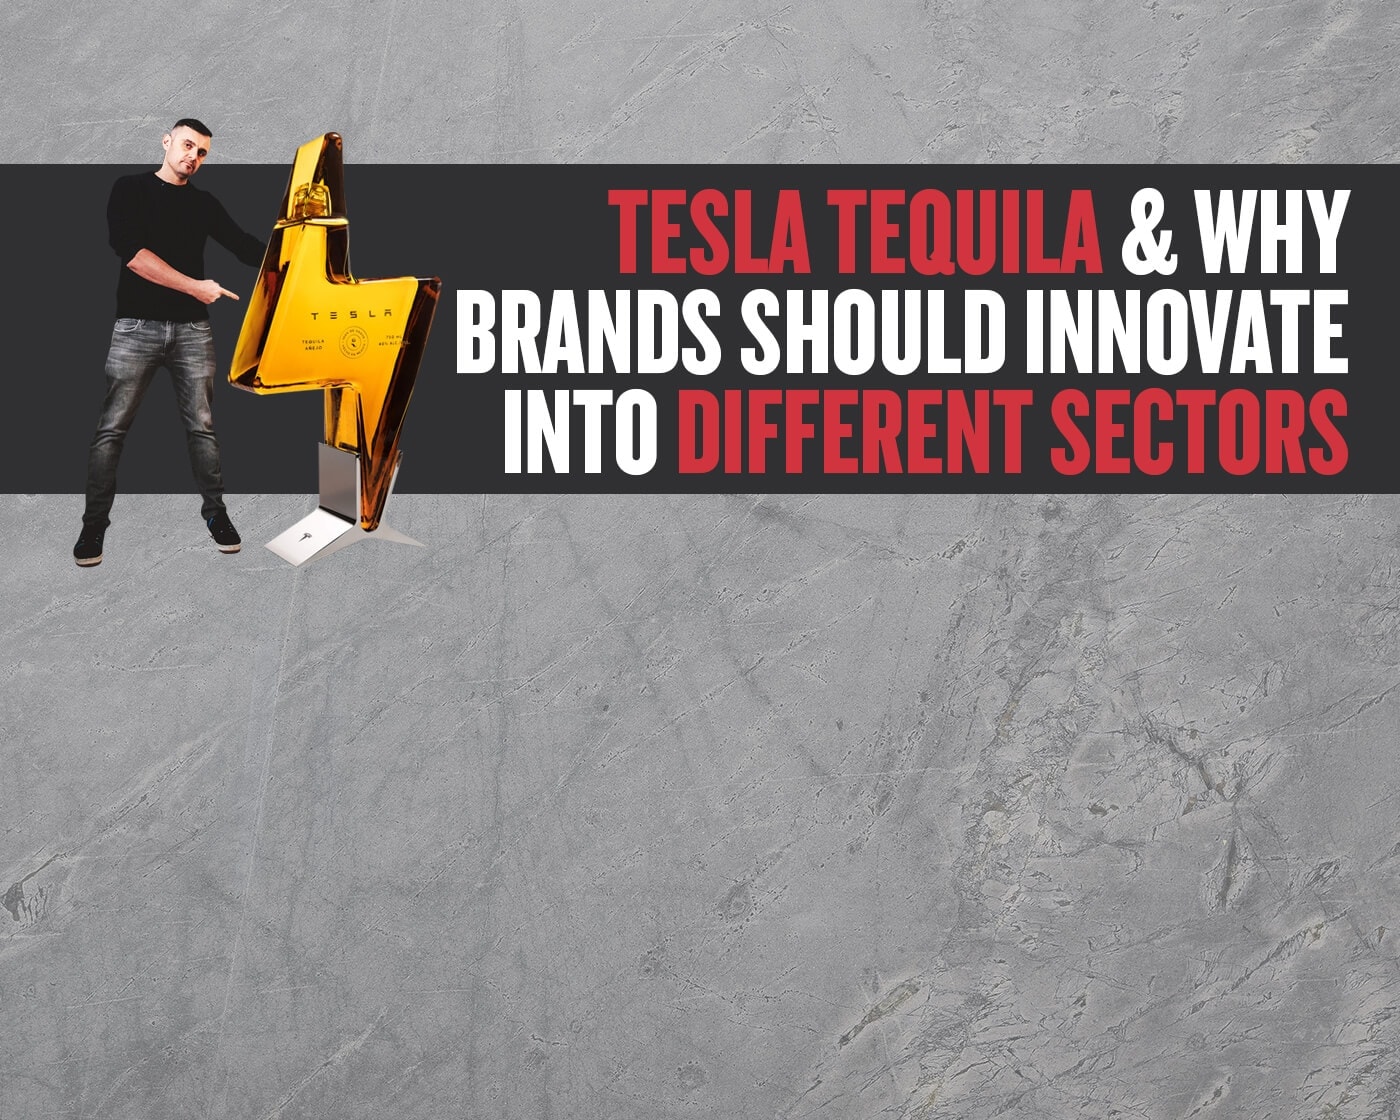 Tesla Tequila: Why brands should innovate into different sectors